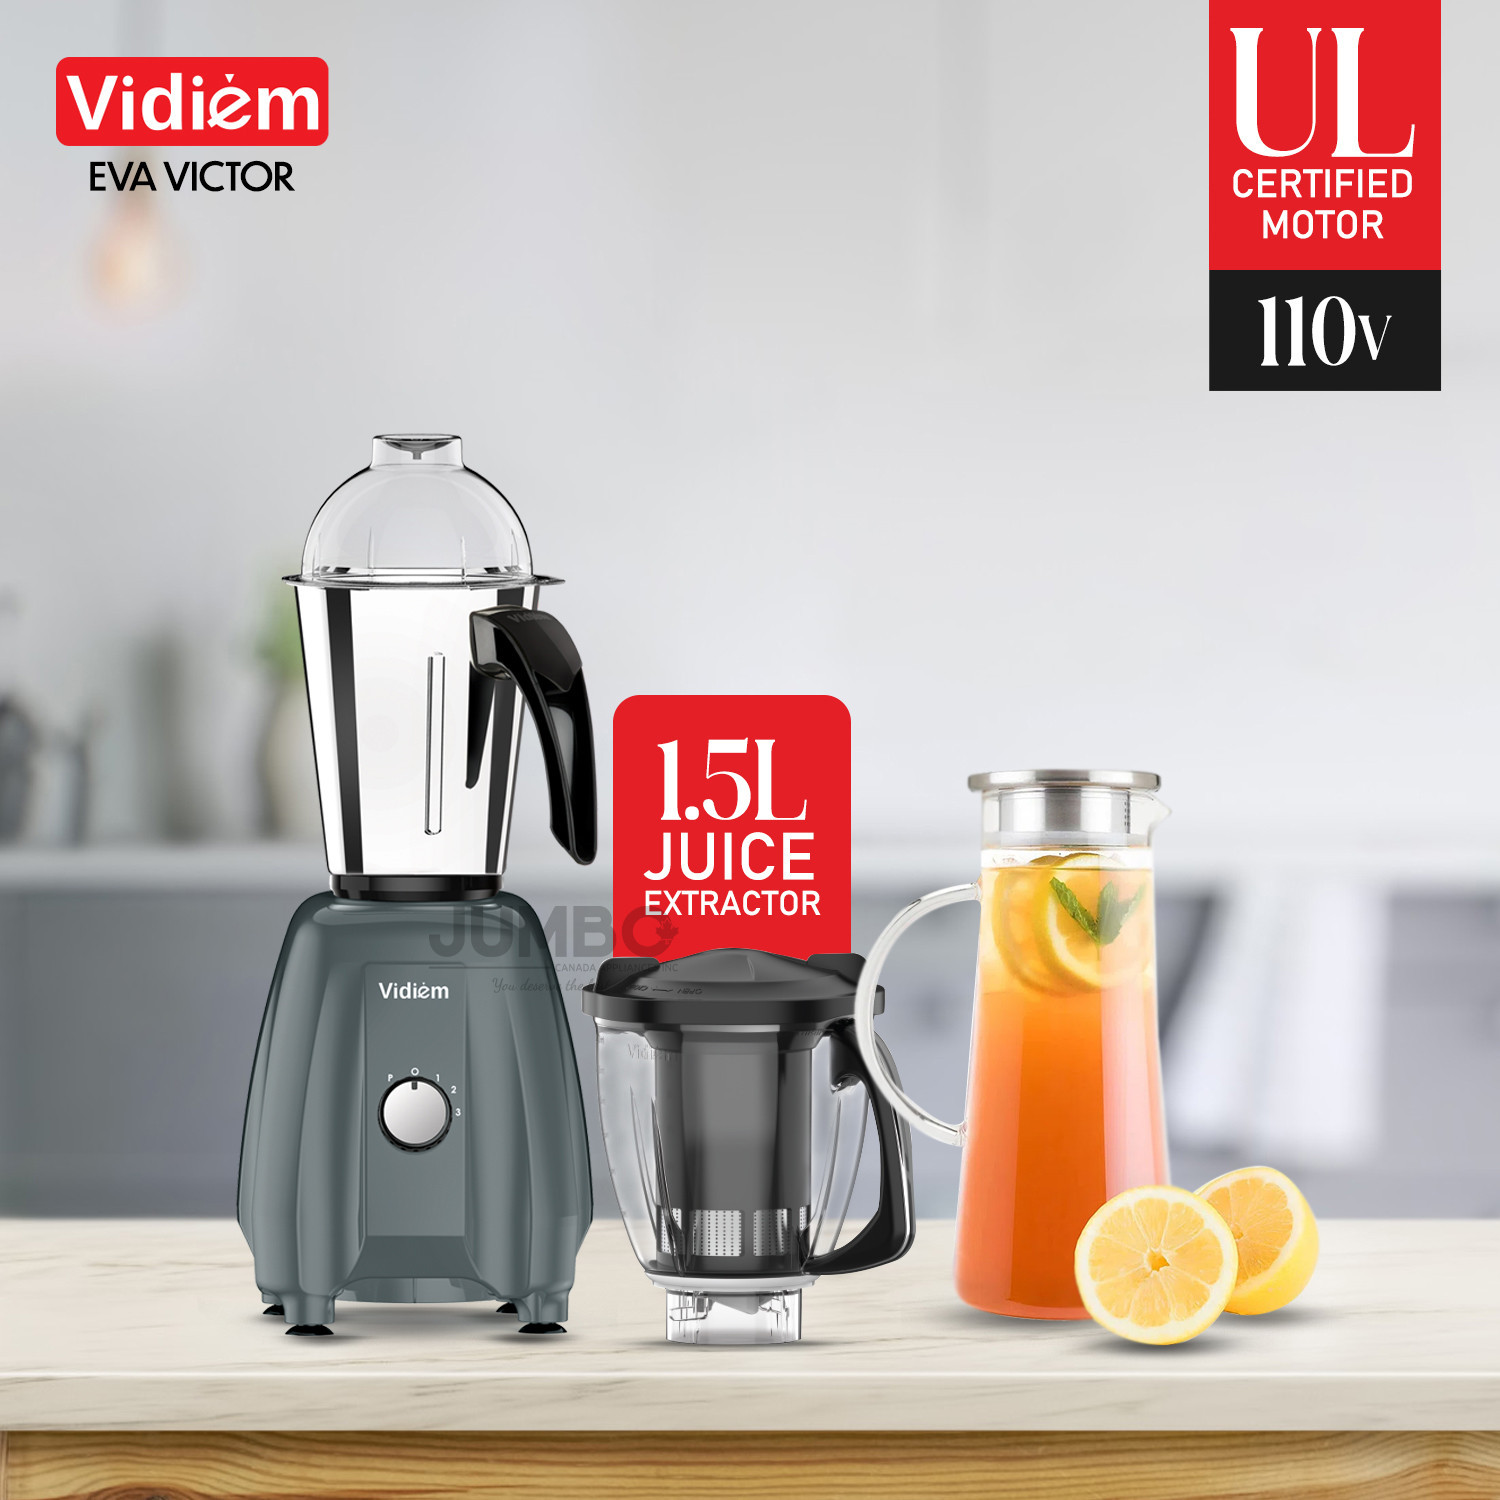 vidiem-eva-victor-650w-110v-stainless-steel-jars-indian-mixer-grinder-spice-coffee-grinder-for-use-in-canada-usa4